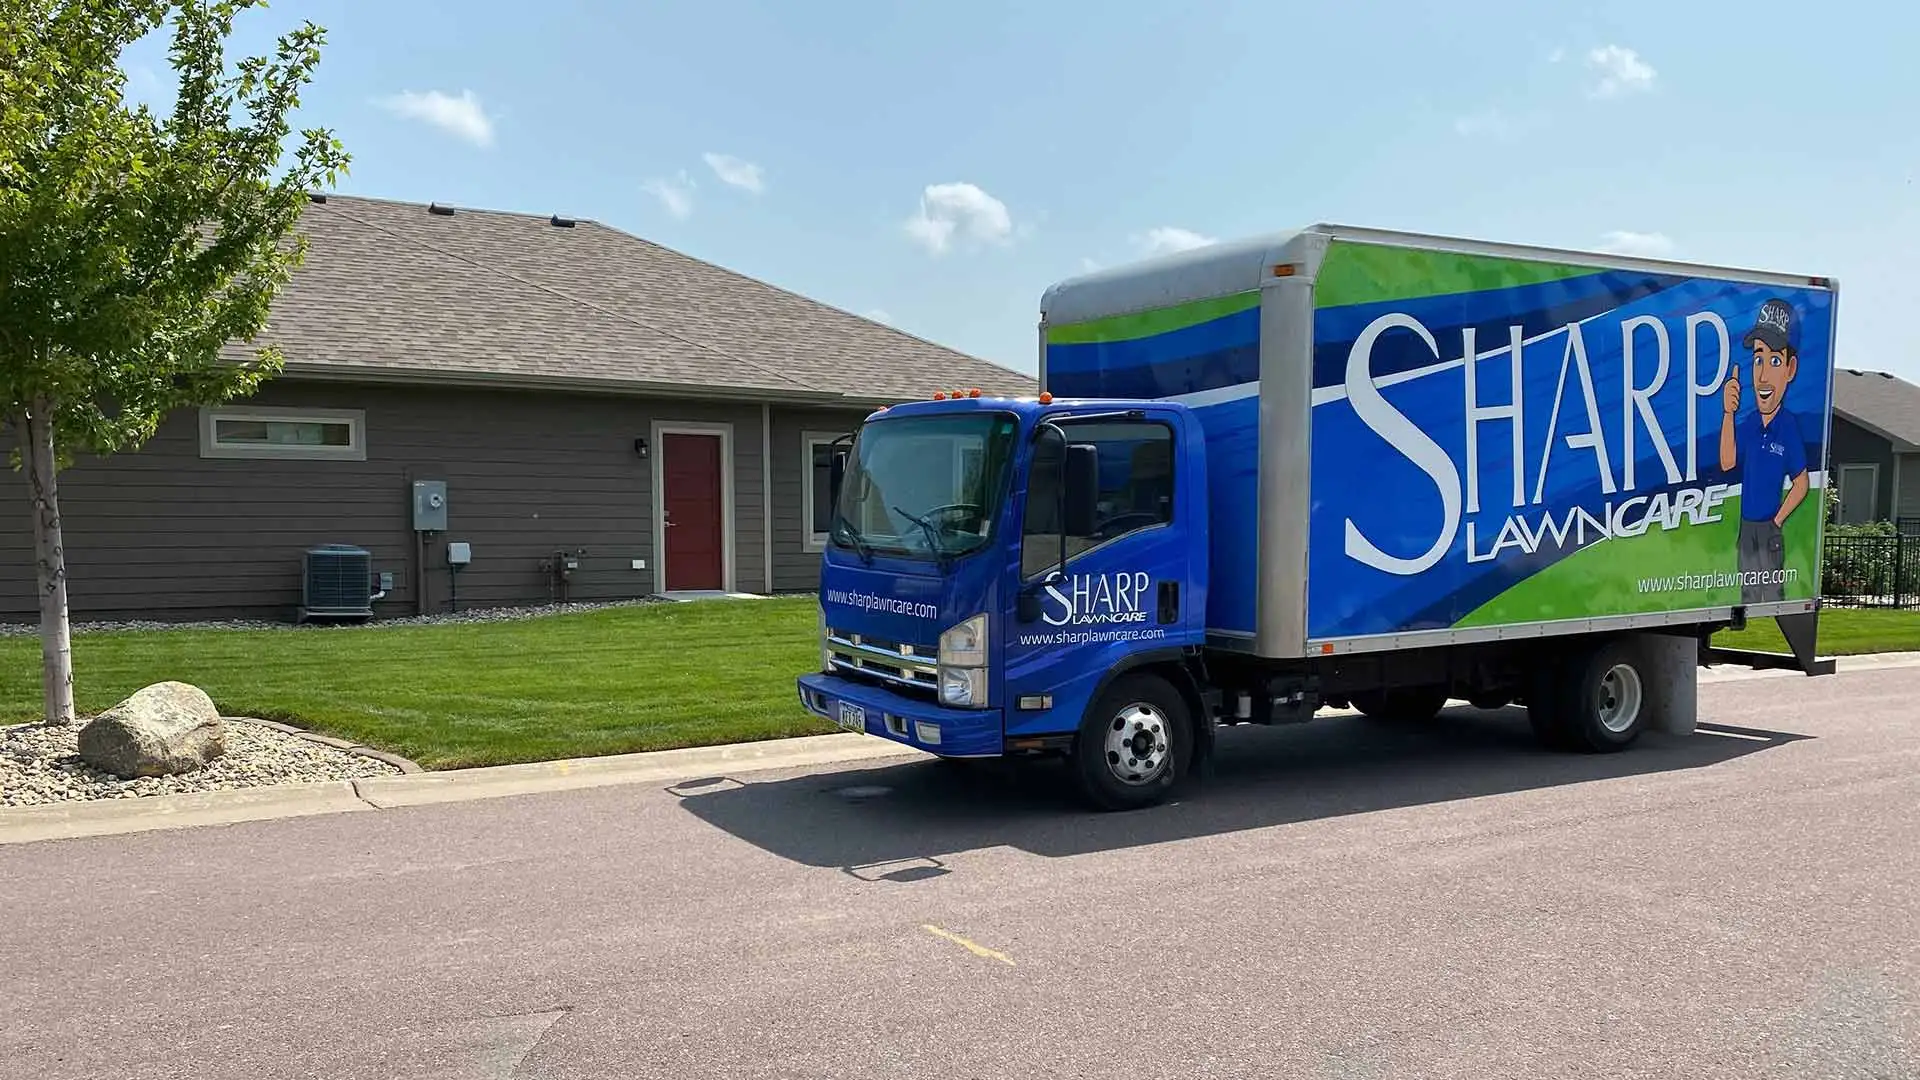 Sharp Lawn Care service truck at a property in Sioux City, IA.